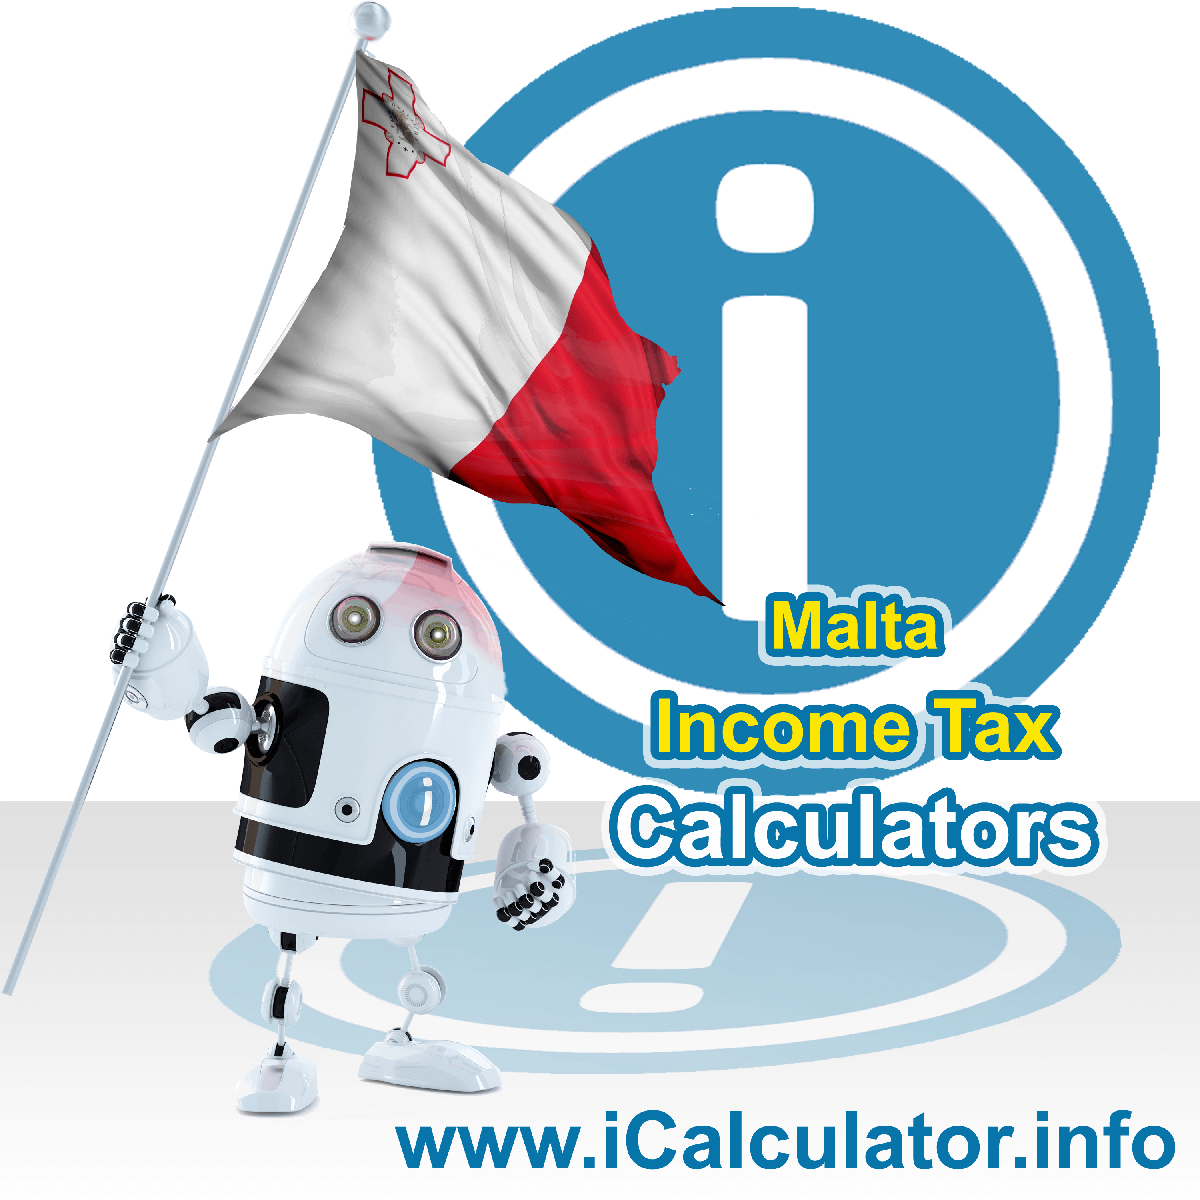 Malta Income Tax Calculator. This image shows a new employer in Malta calculating the annual payroll costs based on multiple payroll payments in one year in Malta using the Malta income tax calculator to understand their payroll costs in Malta in 2023